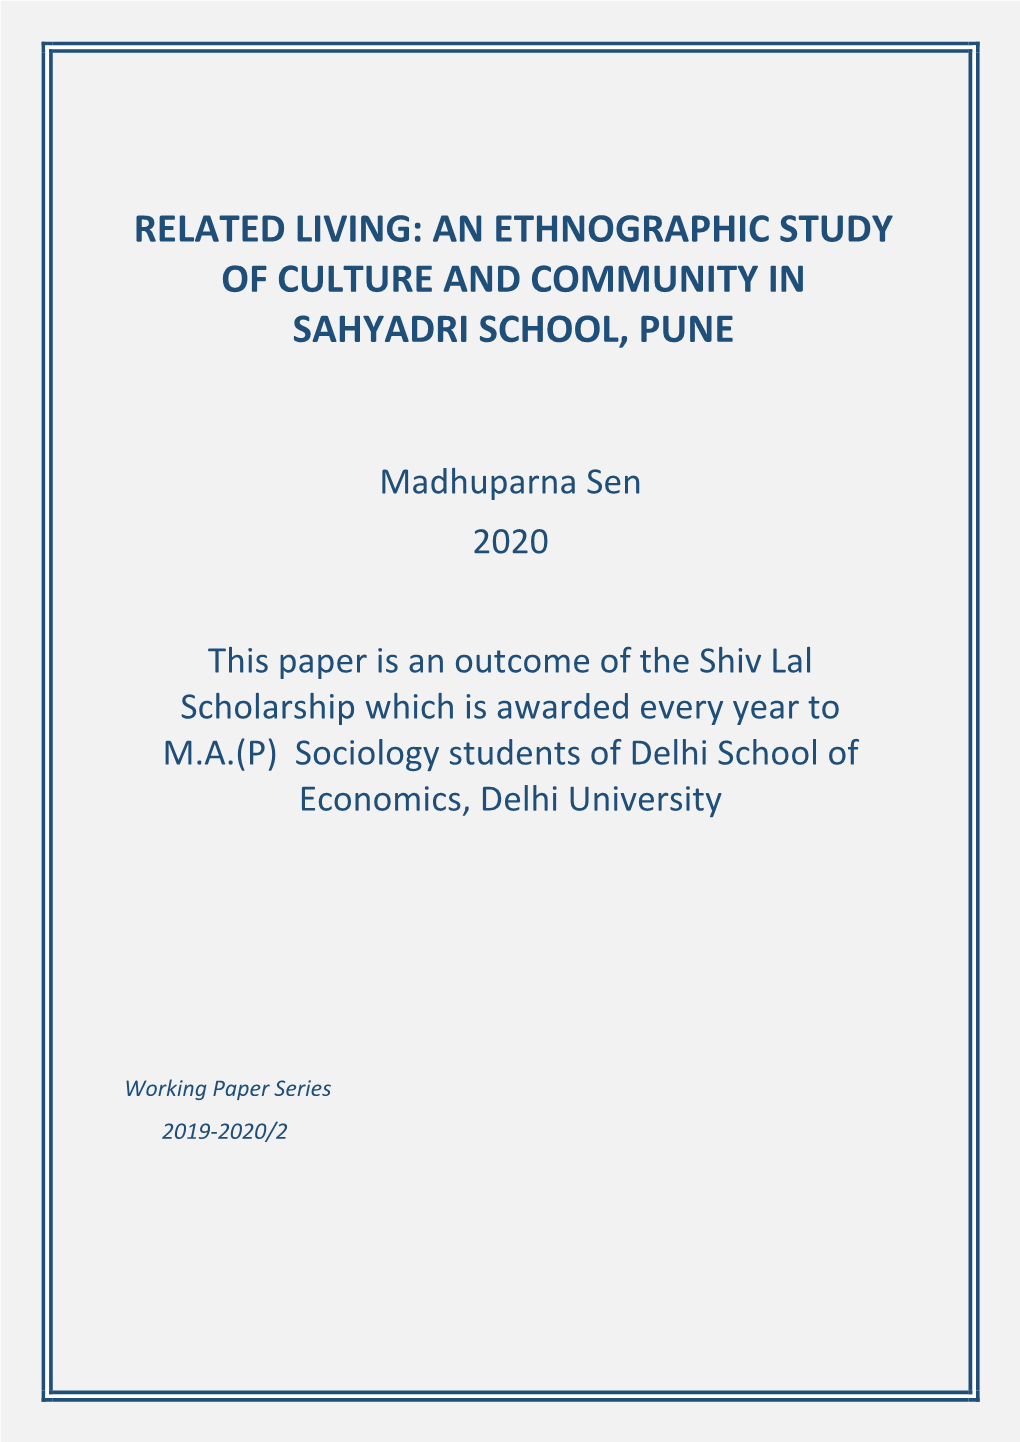 An Ethnographic Study of Culture and Community in Sahyadri School, Pune